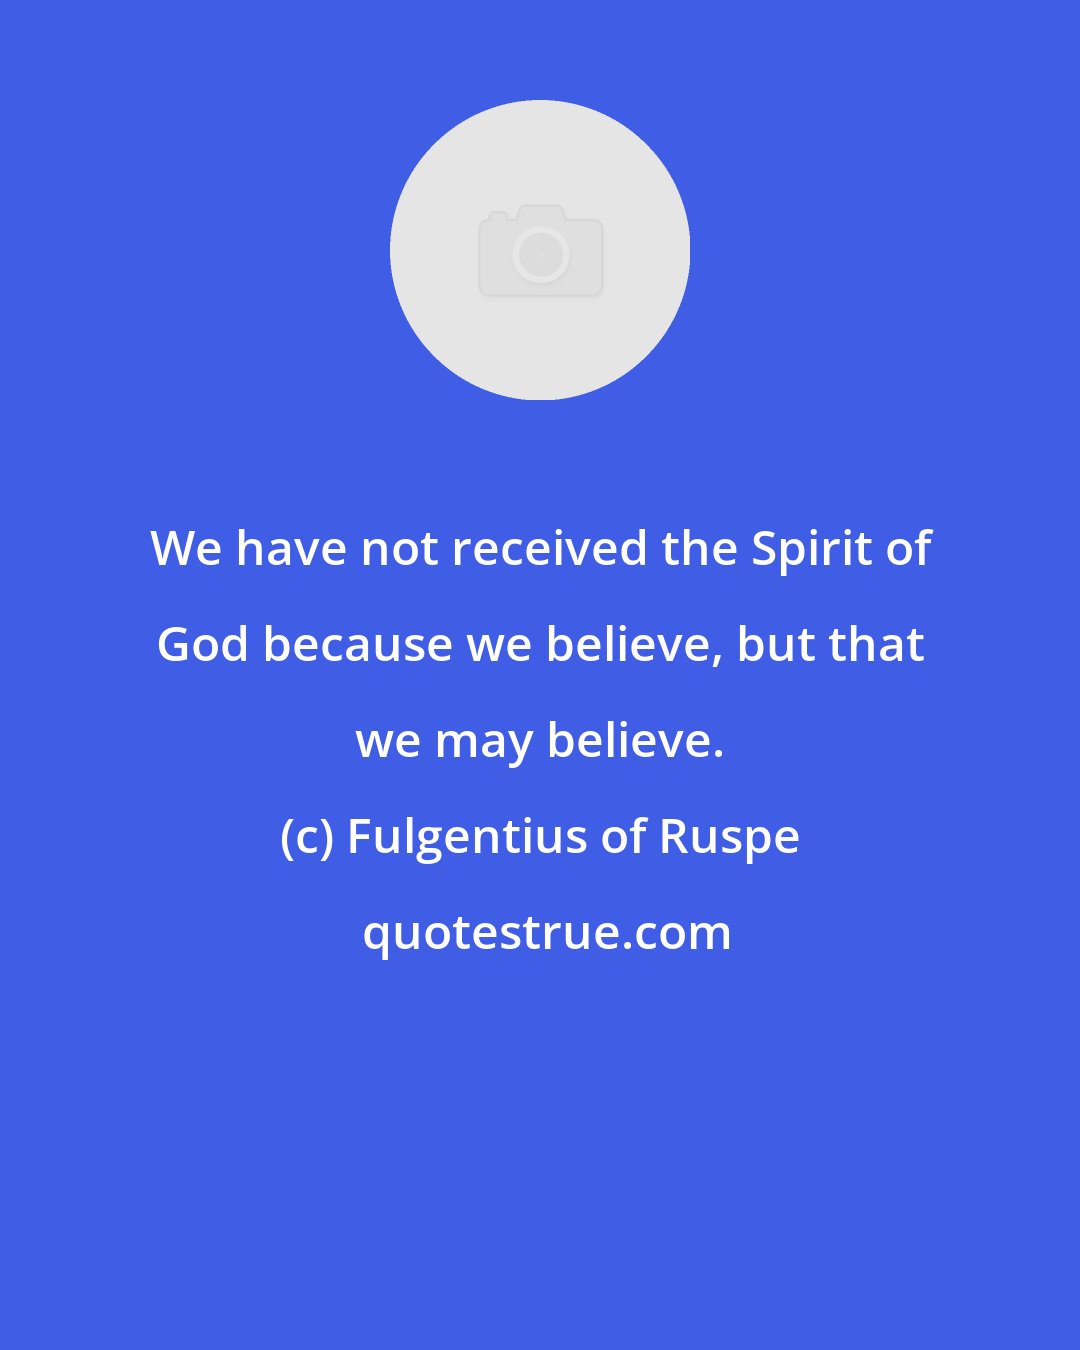 Fulgentius of Ruspe: We have not received the Spirit of God because we believe, but that we may believe.